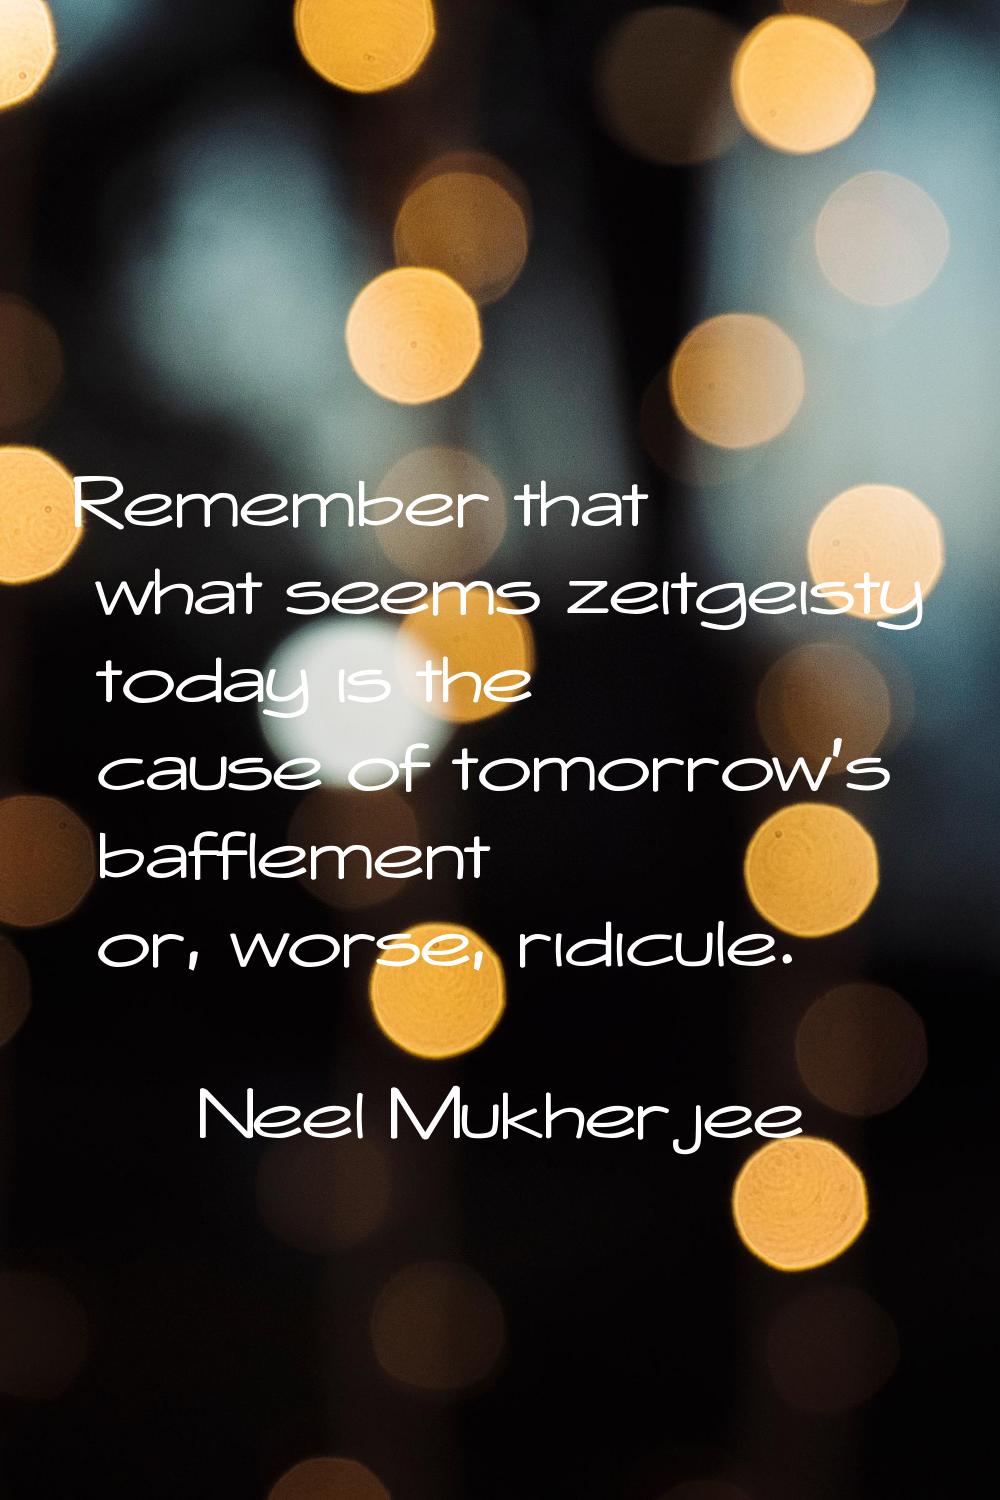 Remember that what seems zeitgeisty today is the cause of tomorrow's bafflement or, worse, ridicule